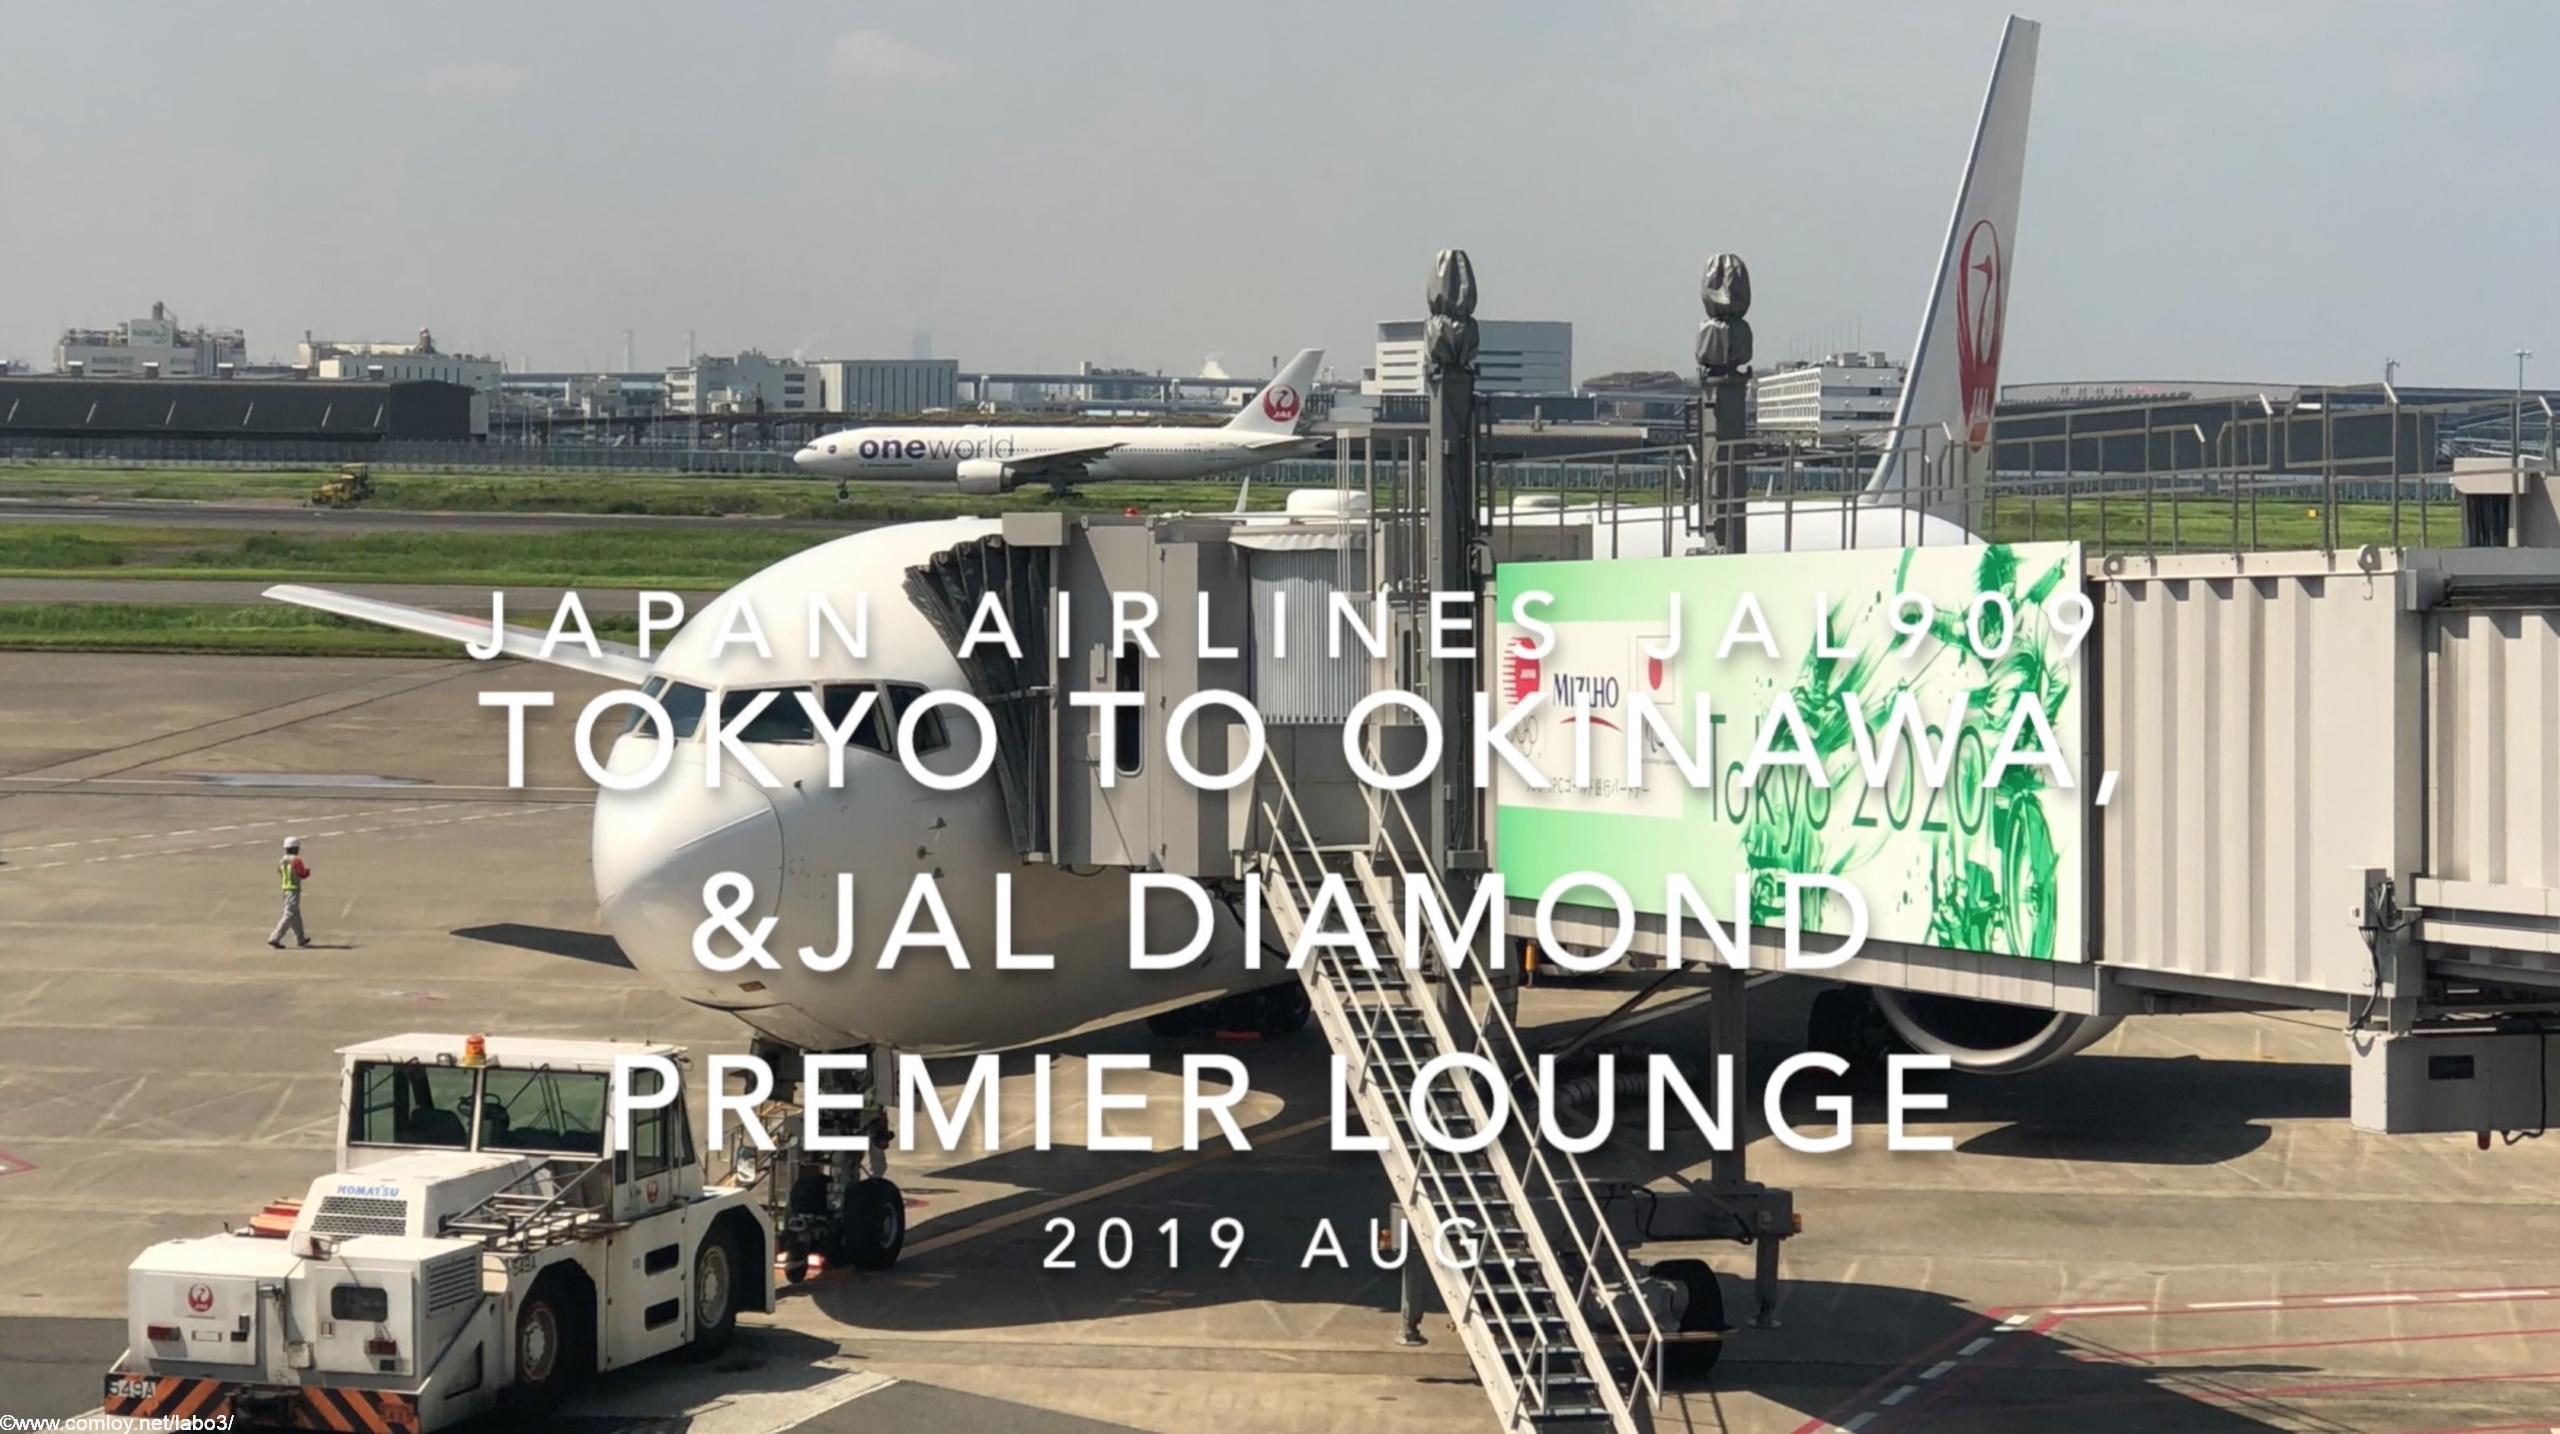 【Flight Report】Japan airlines JAL909 TOKYO TO OKINAWA &JAL DIAMOND PREMIER LOUNGE 2019 AUG 日本航空 羽田 那覇 搭乗記